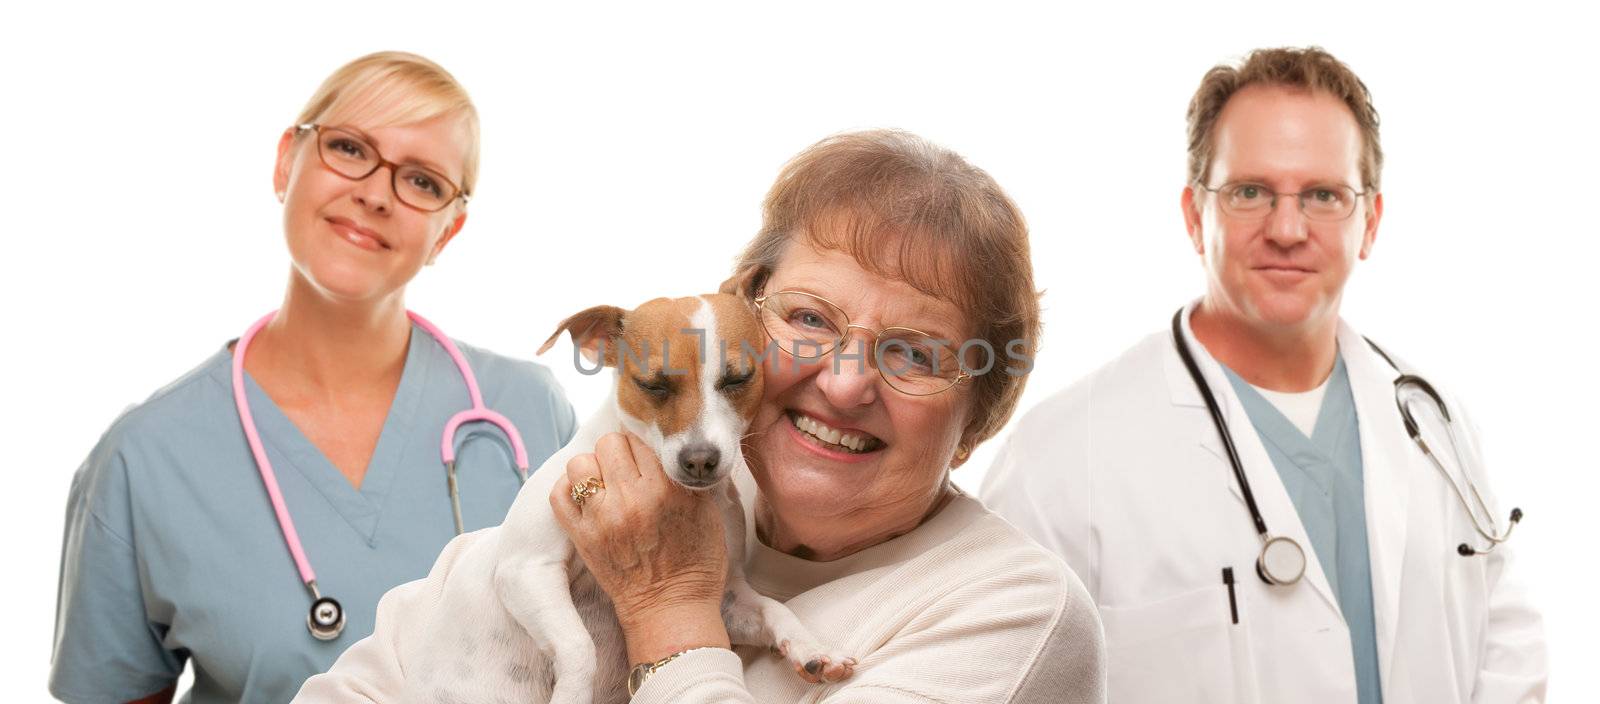 Happy Senior Woman with Dog and Veterinarian Team by Feverpitched